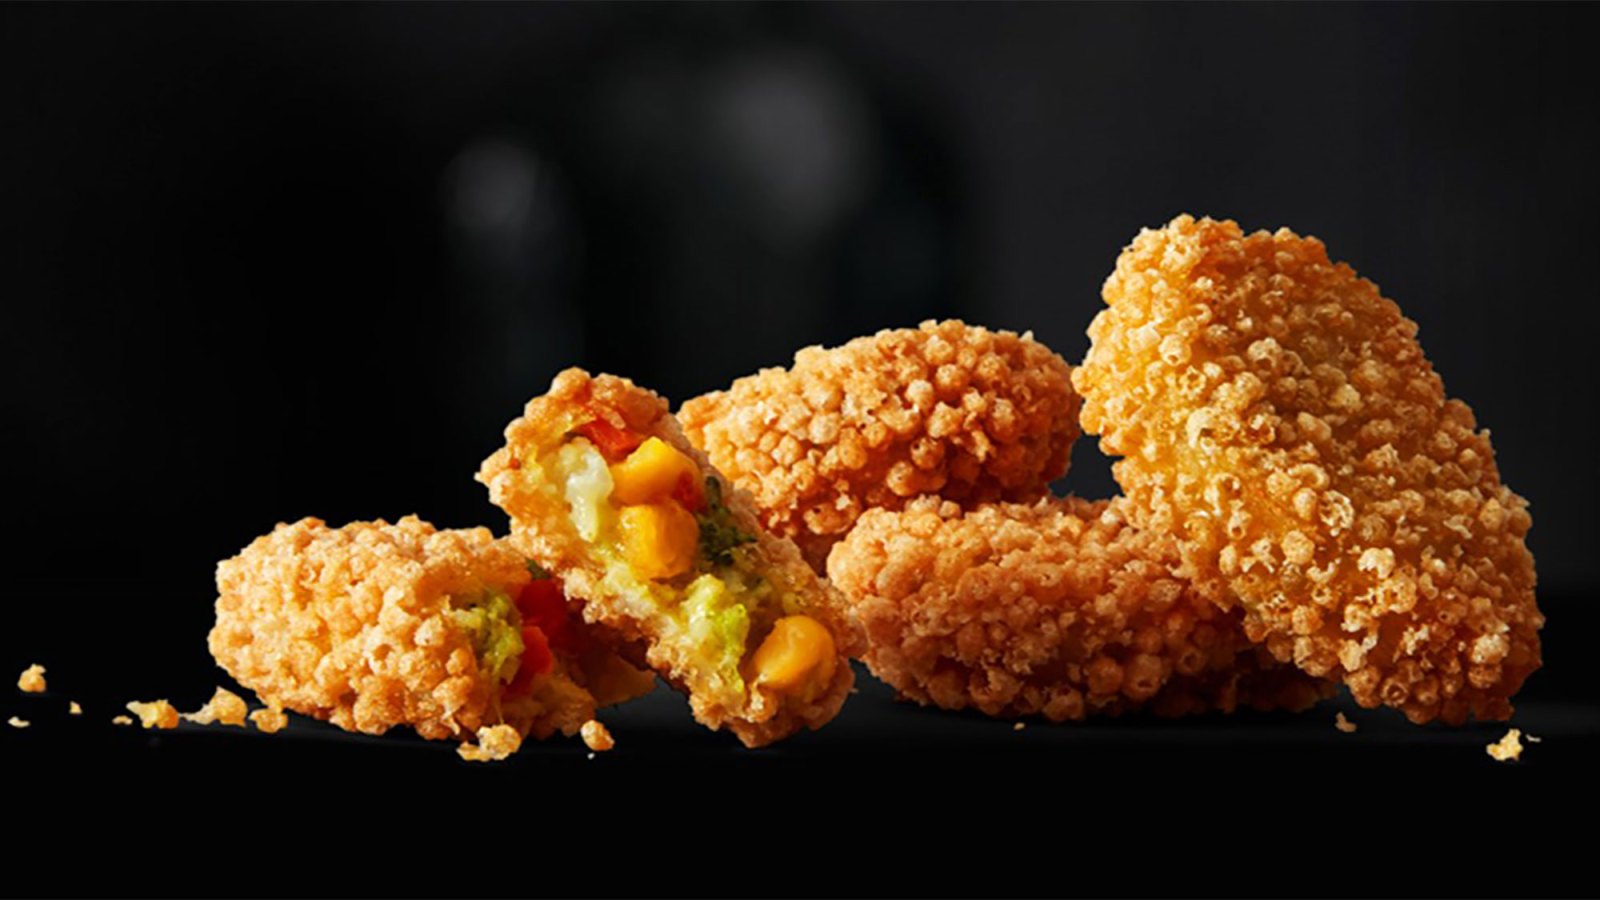 McDonald's Is Testing Vegan McNuggets, But They’re Not Available Everywhere